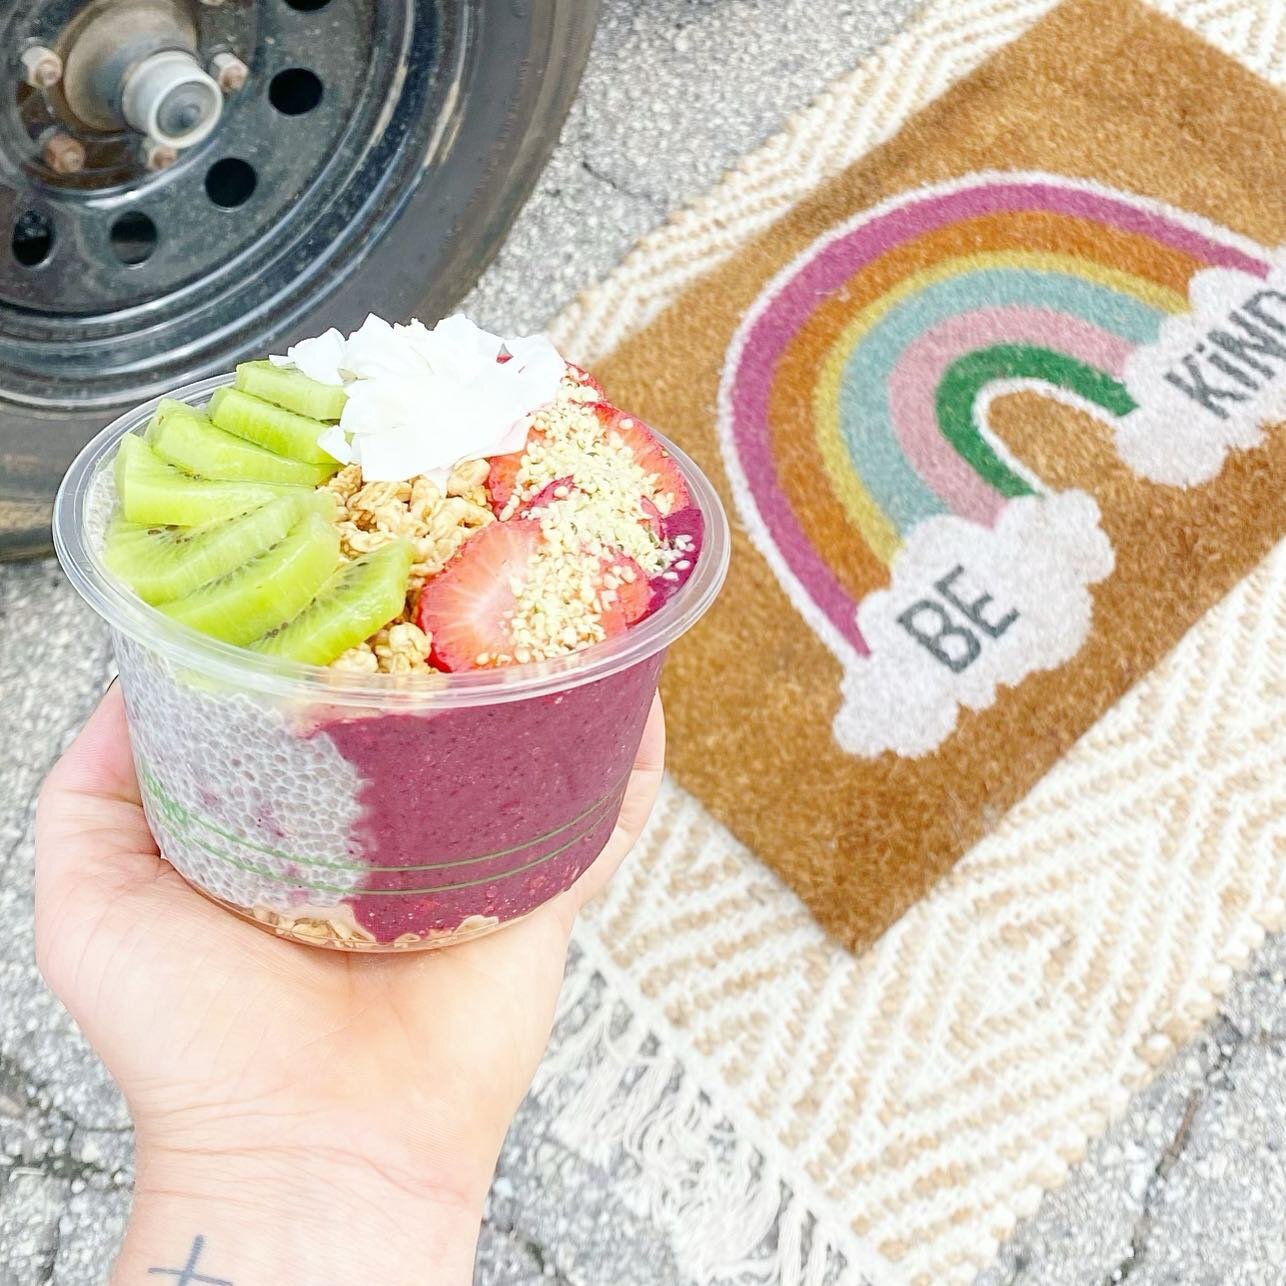 Just a friendly reminder 🌟 BE KIND 🌟 
.
.
 #acaibowl #acaibowls #acai #dailyfoodfeed #lovefood #eatingfortheinsta #smoothie #spoonfeed #smoothiebowl #healthy #foodtruck #foodtrailer #cheatmeal #tastingtable #healthylifestyle #heresmyfood #eater #kn